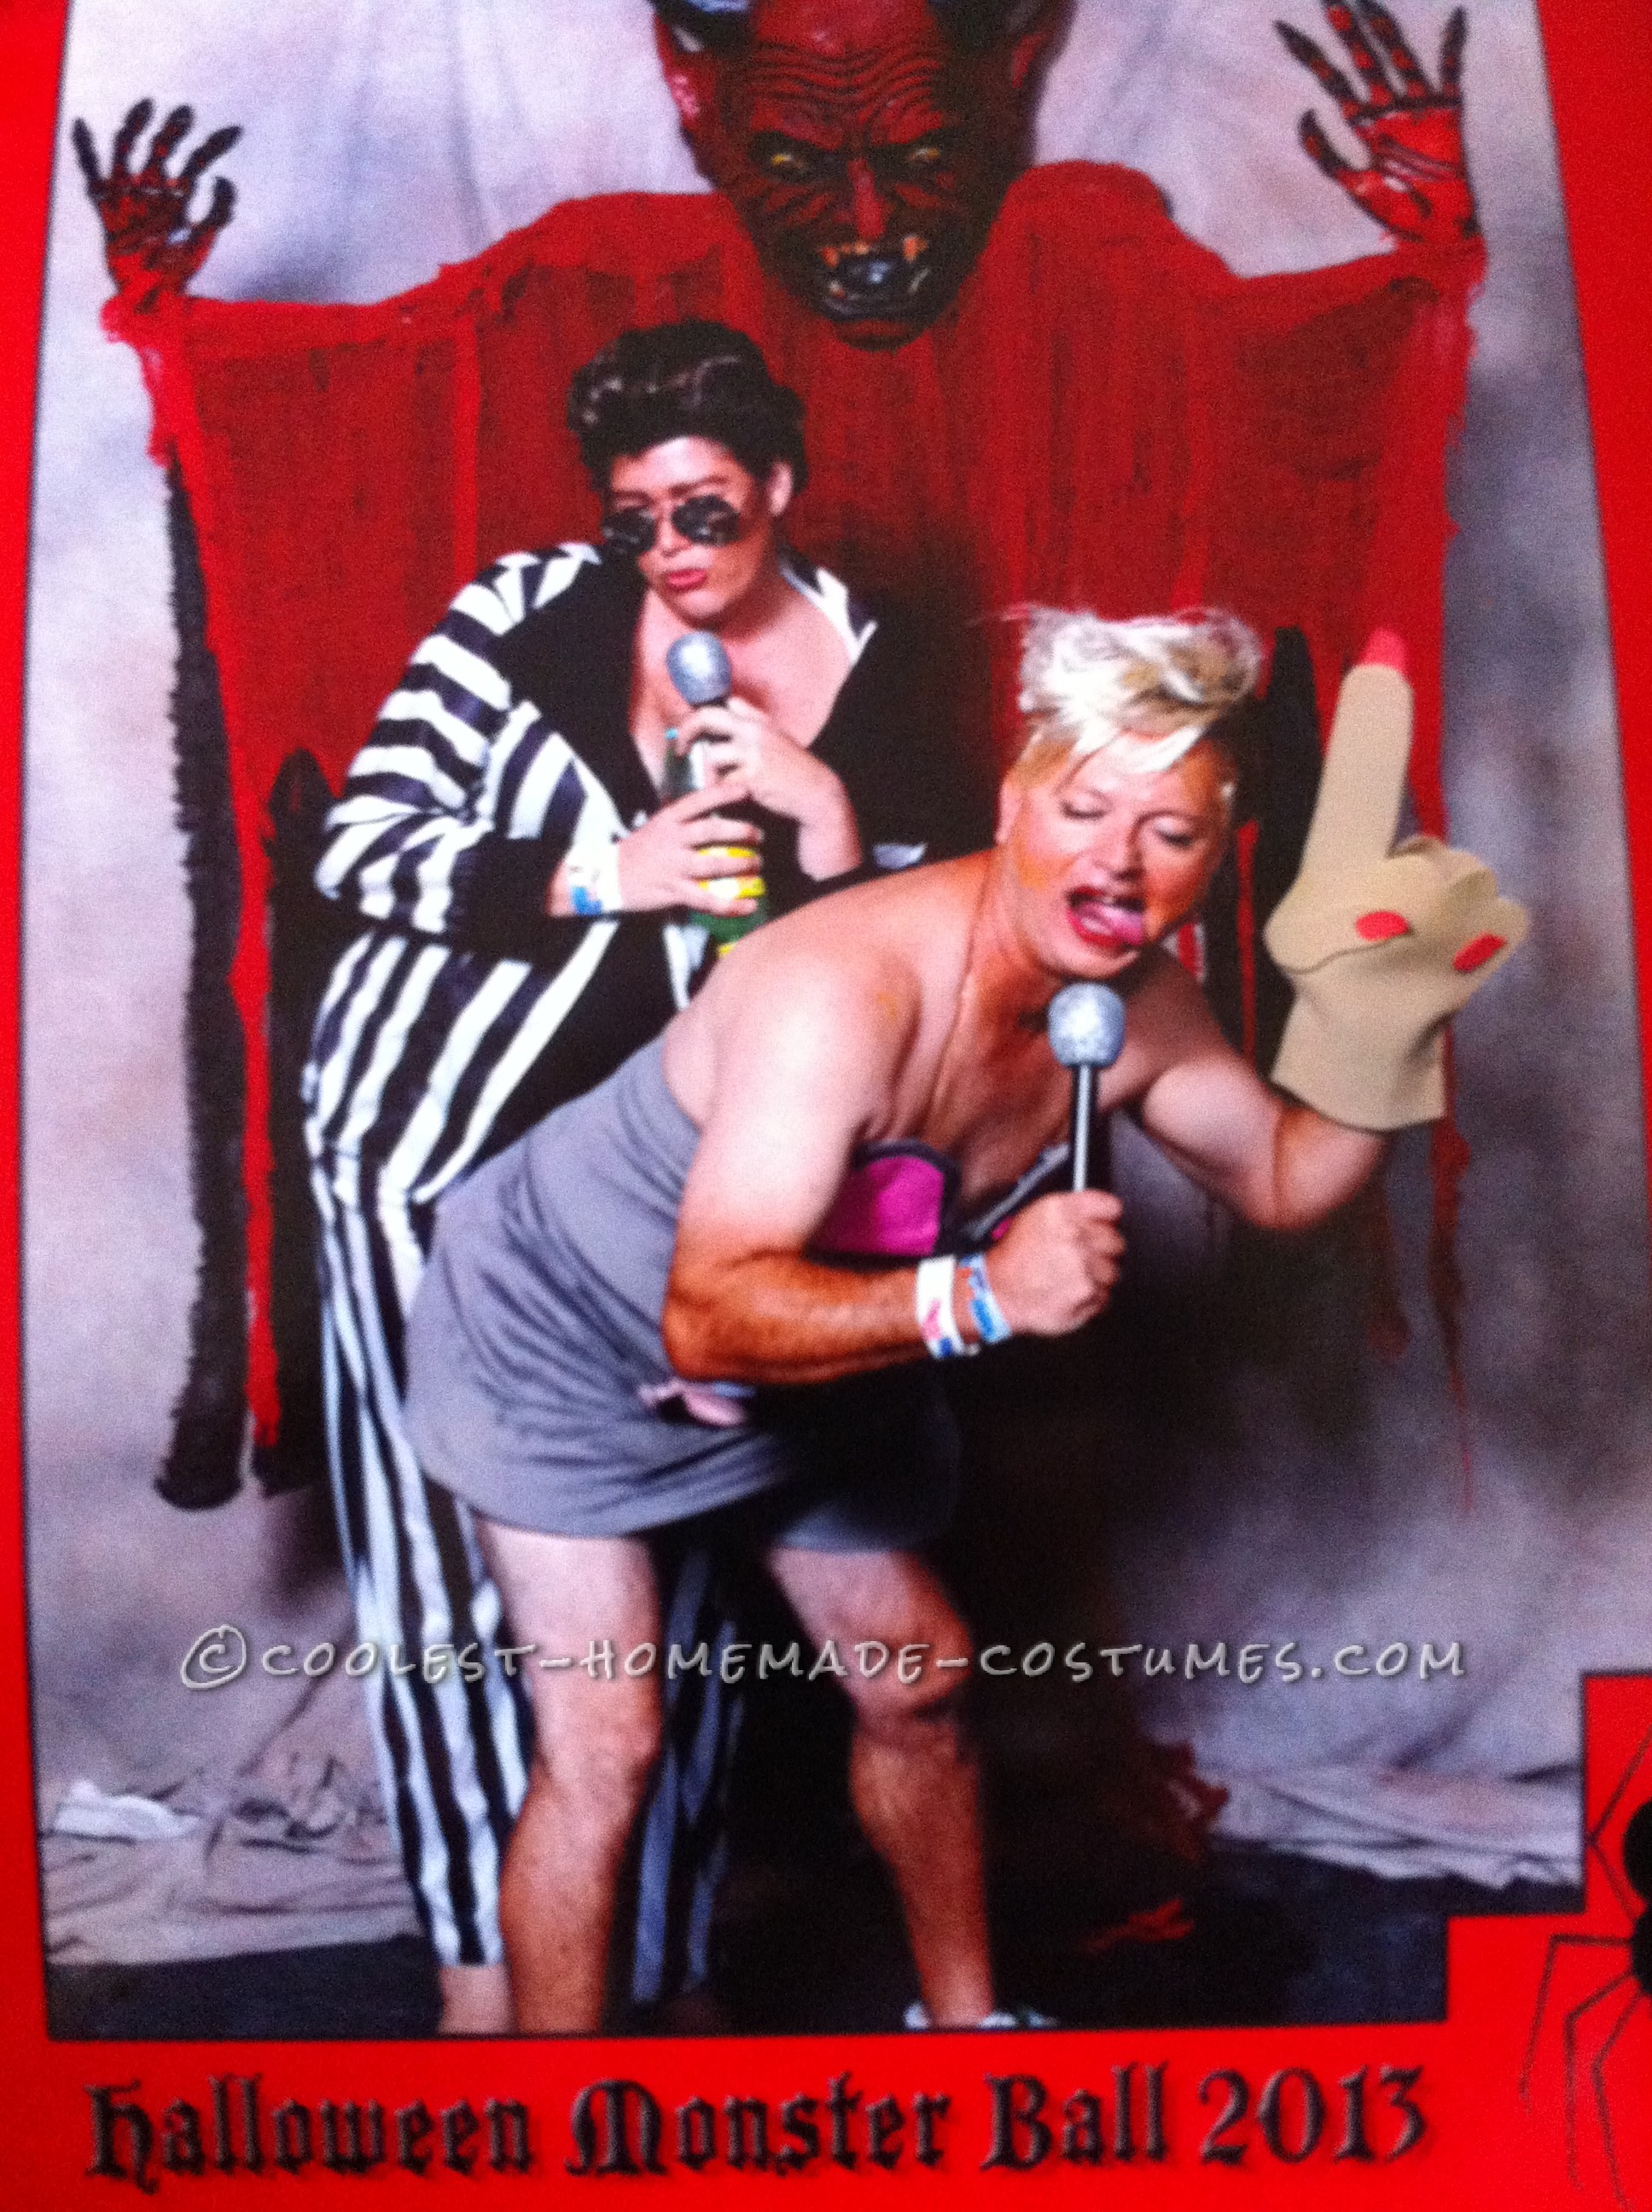 Hilarious Gender-Bend Couple Costume: Miley Twerk It and Robin Thicke